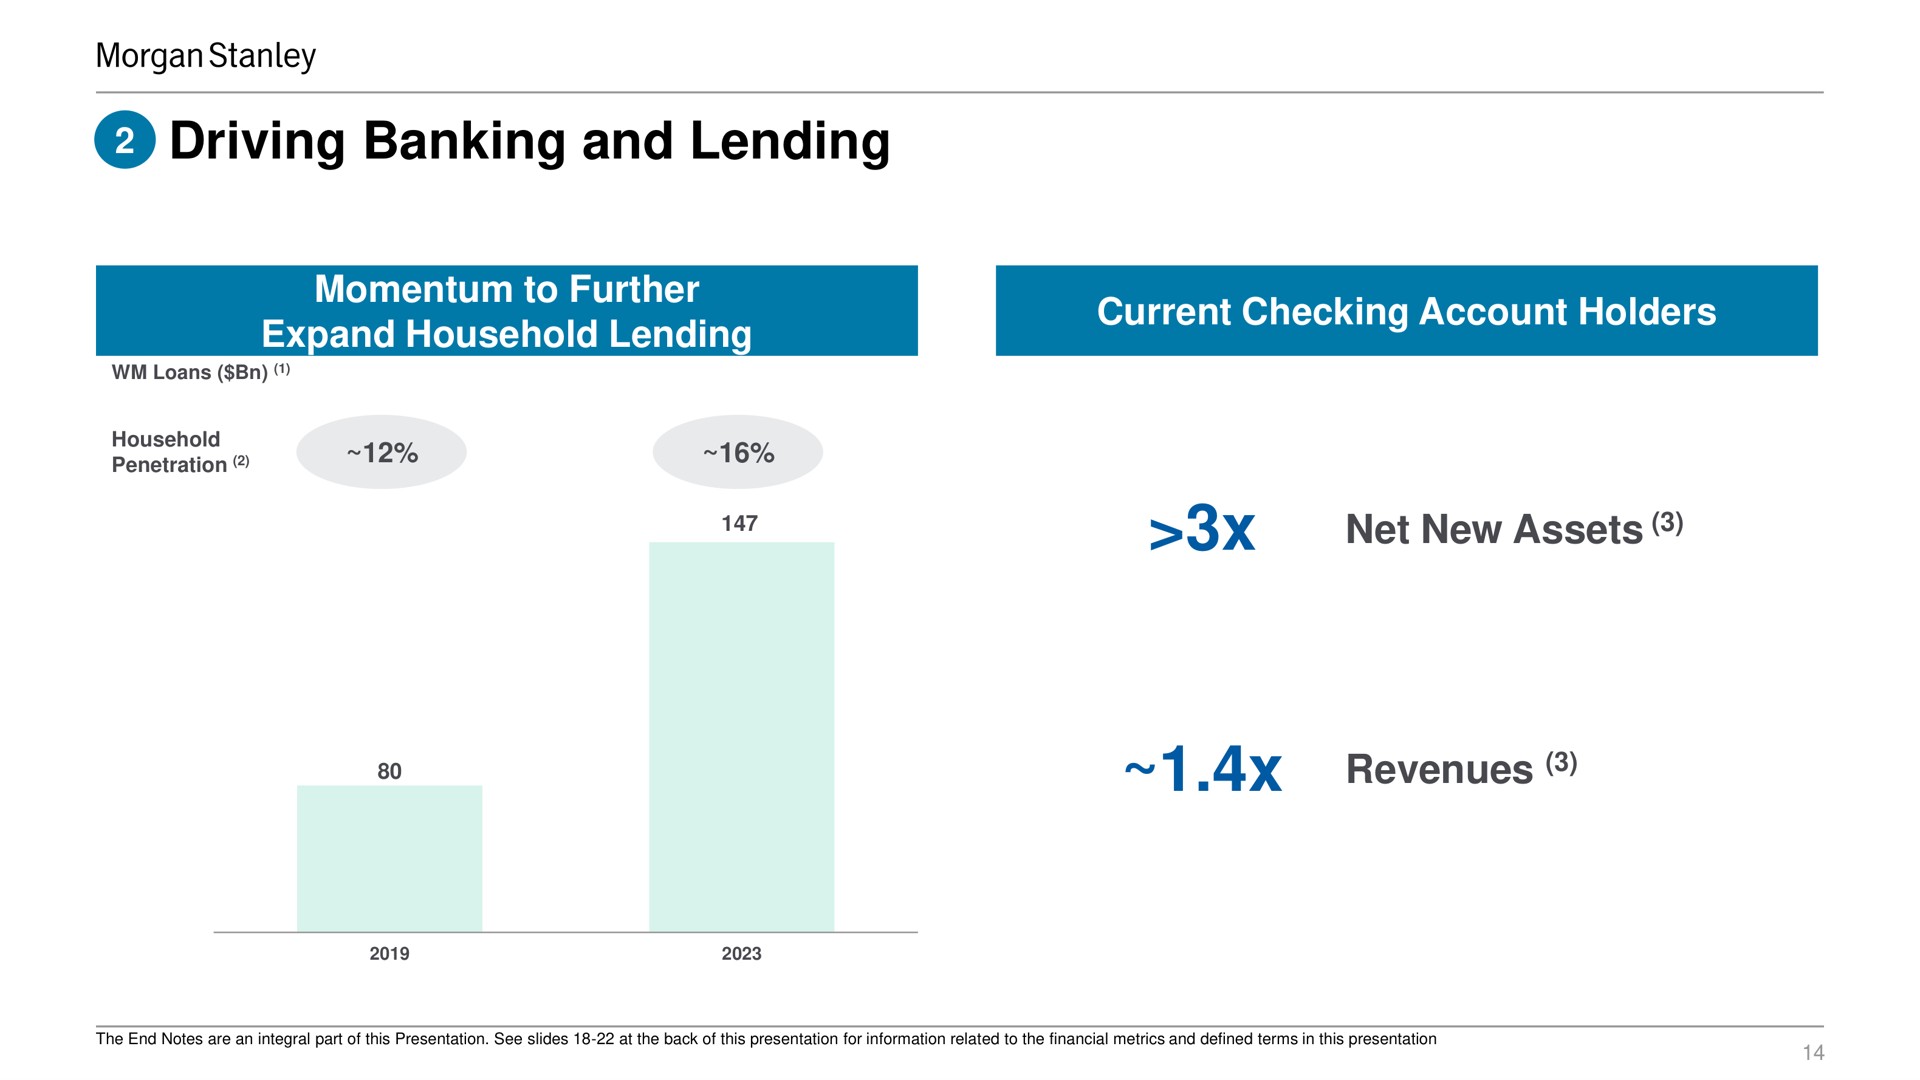 driving banking and lending momentum to further expand household lending current checking account holders net new assets revenues | Morgan Stanley